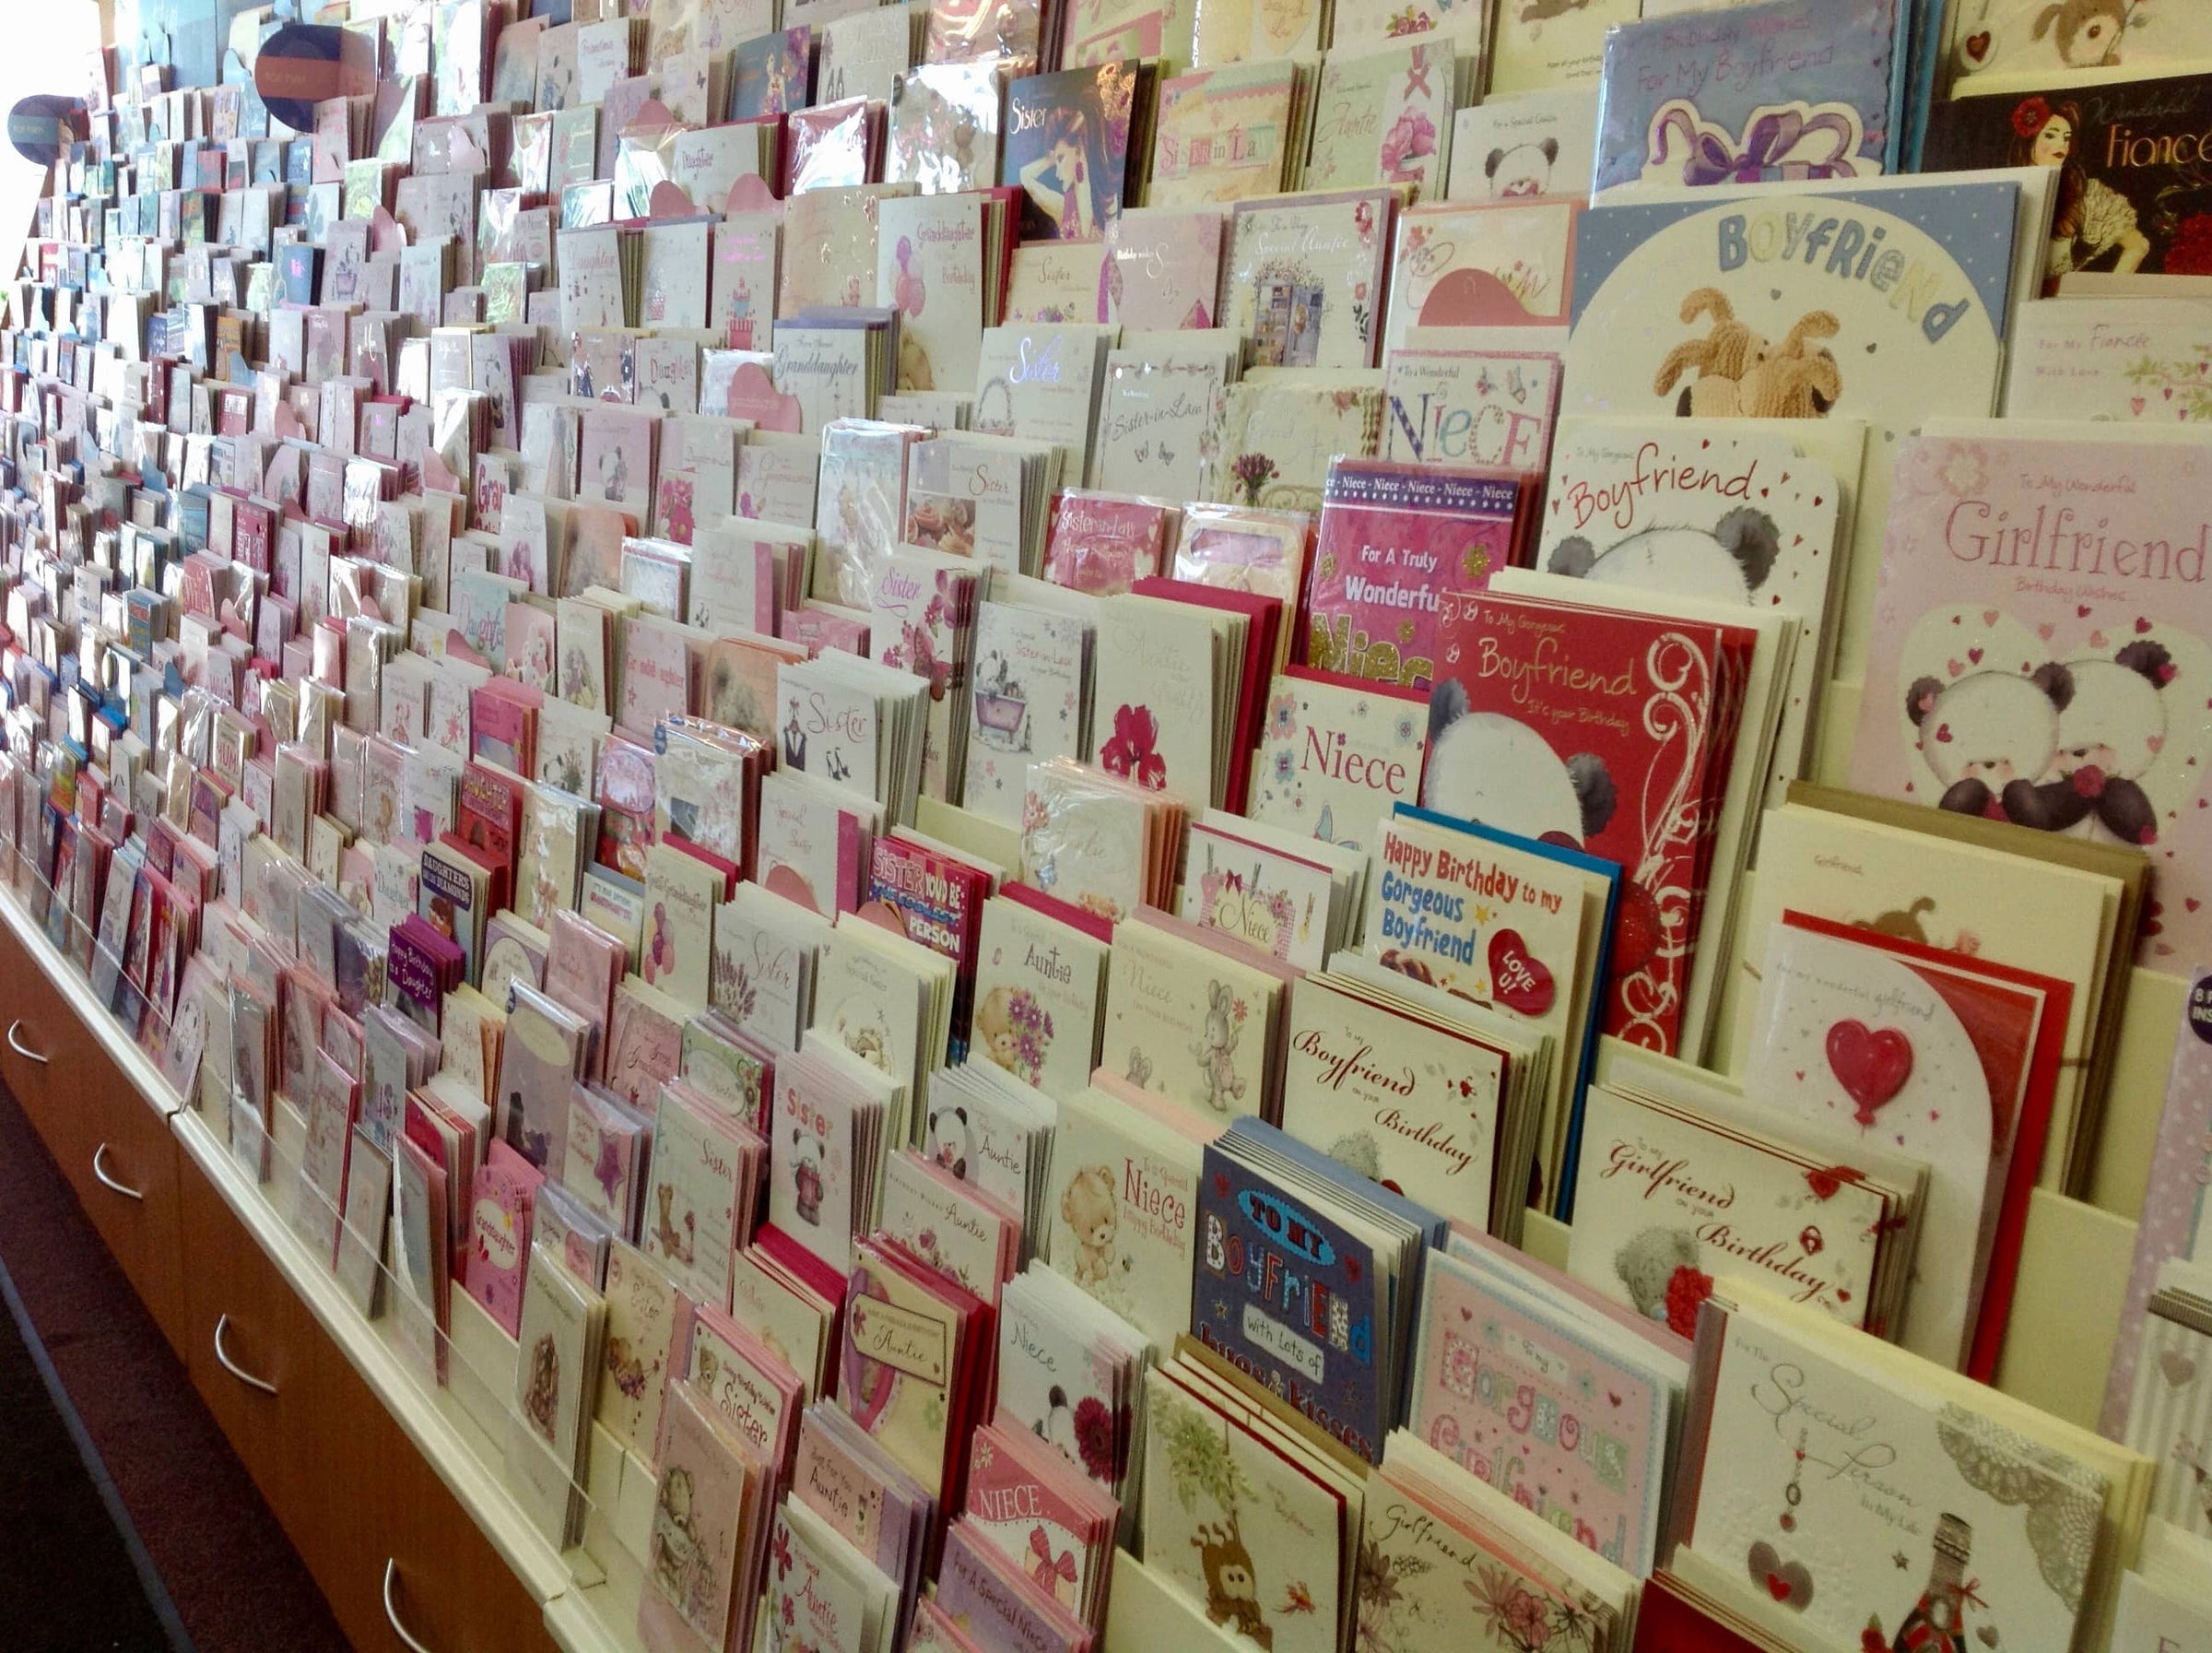 Inside our greetings card shop located in Claregate, Wolverhampton, WV6 9EH